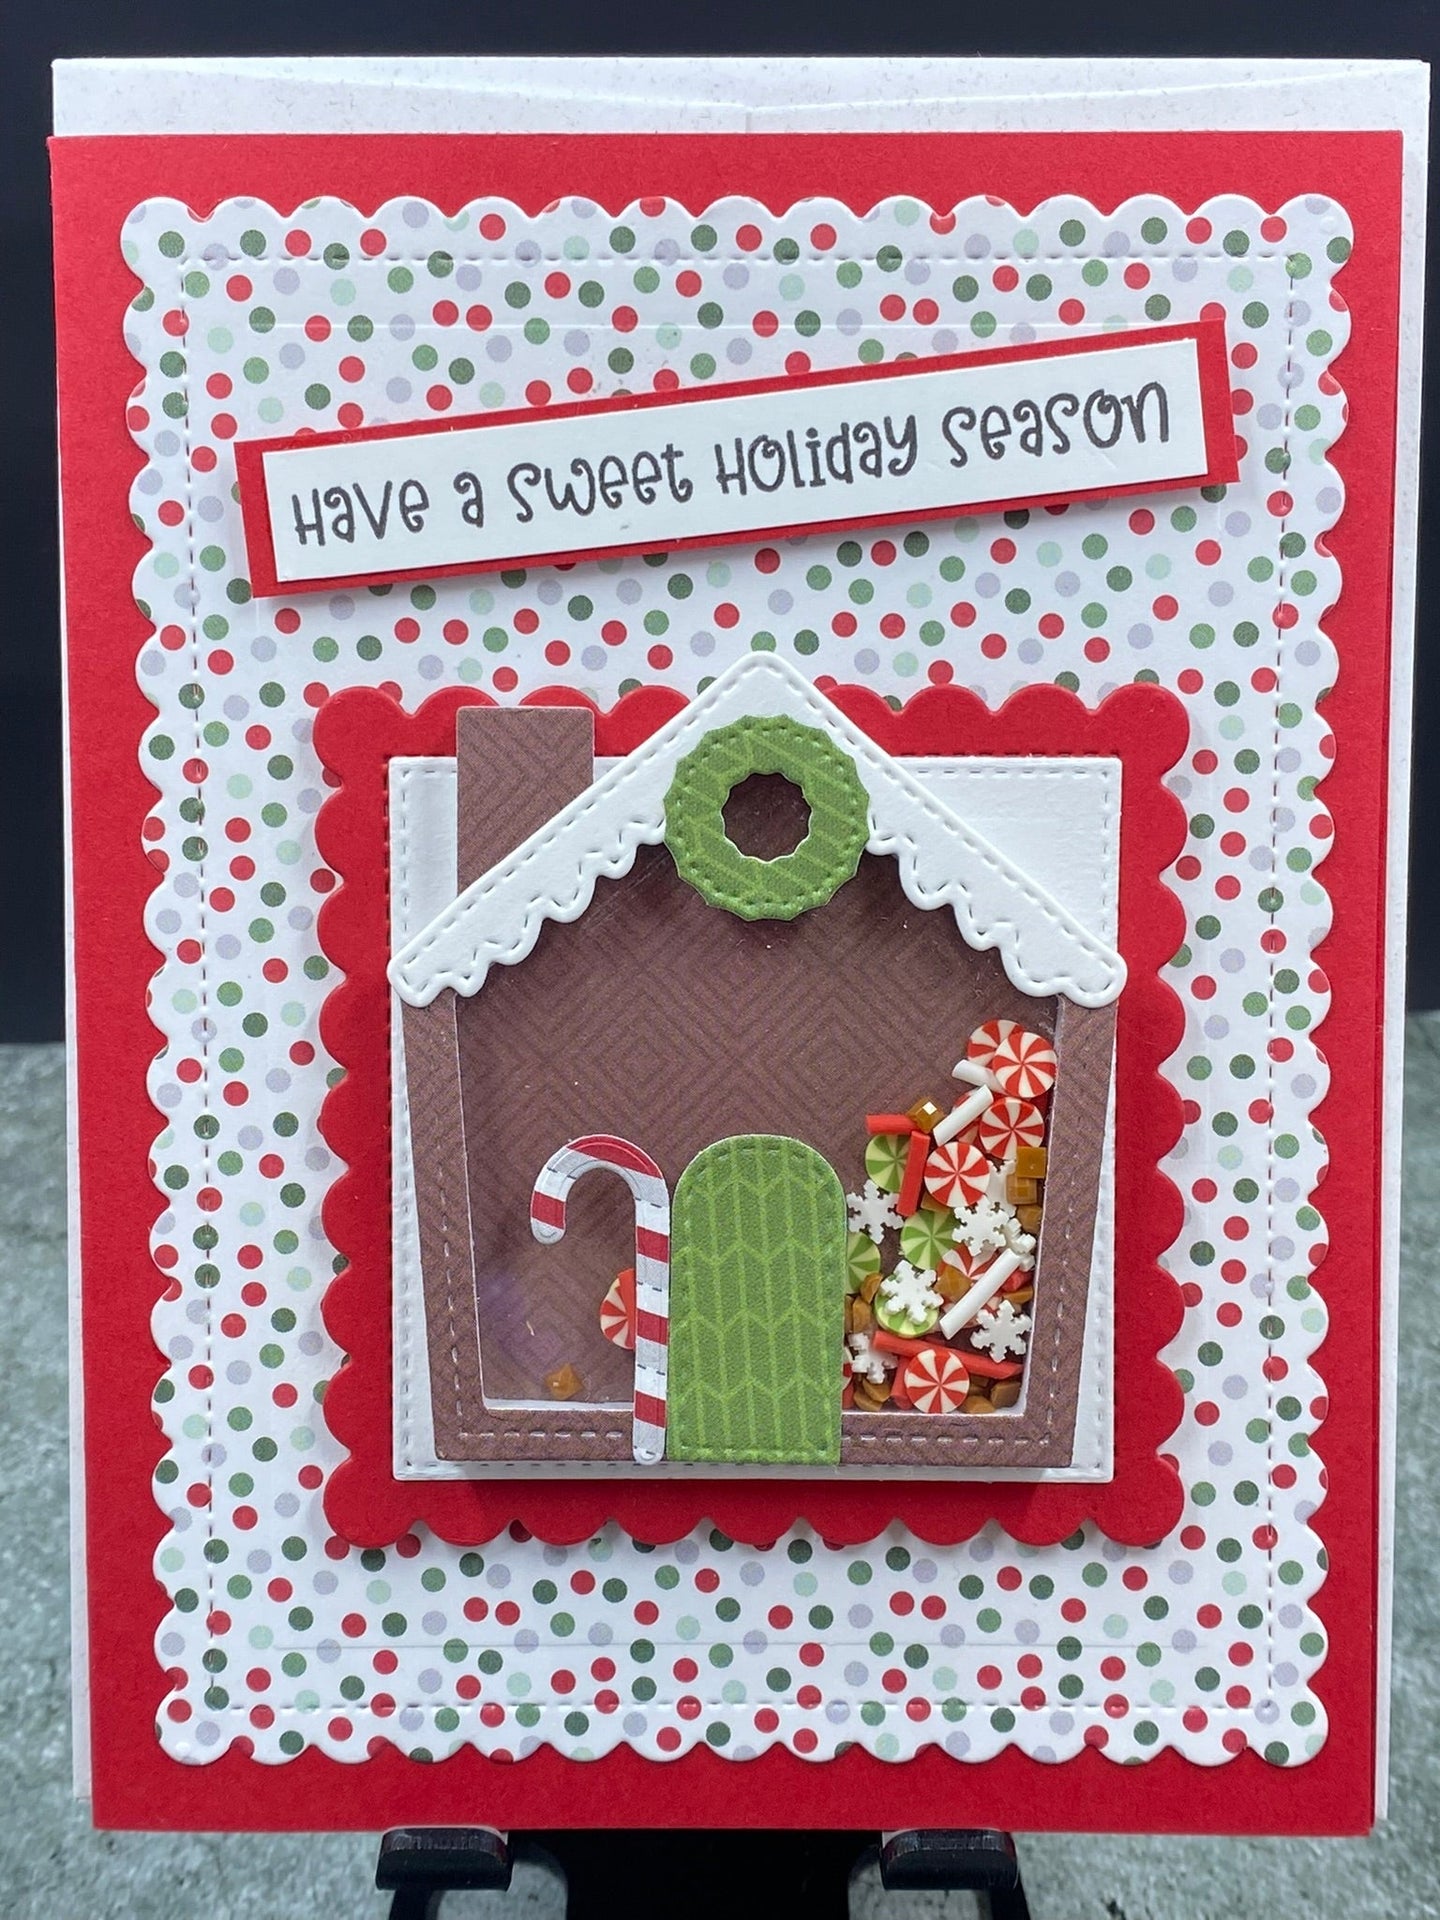 Have A Sweet Holiday Season with Gingerbread Shaker - CM Design Studios